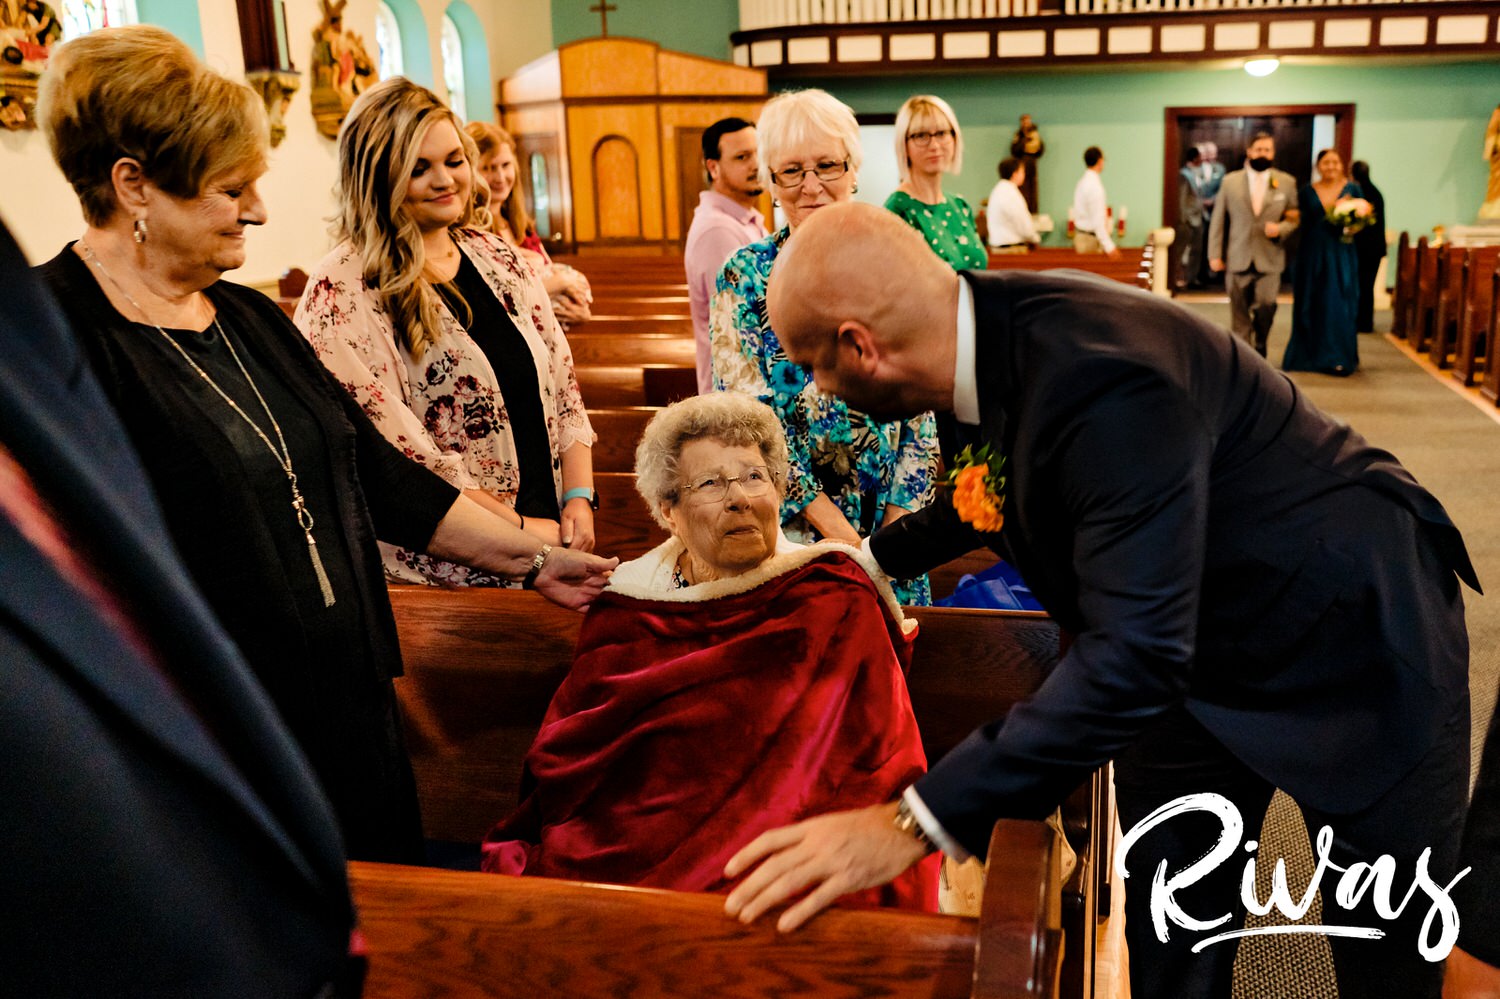 A candid picture of a groom leaning in to kiss his grandma just after she's been seated for his wedding ceremony. 